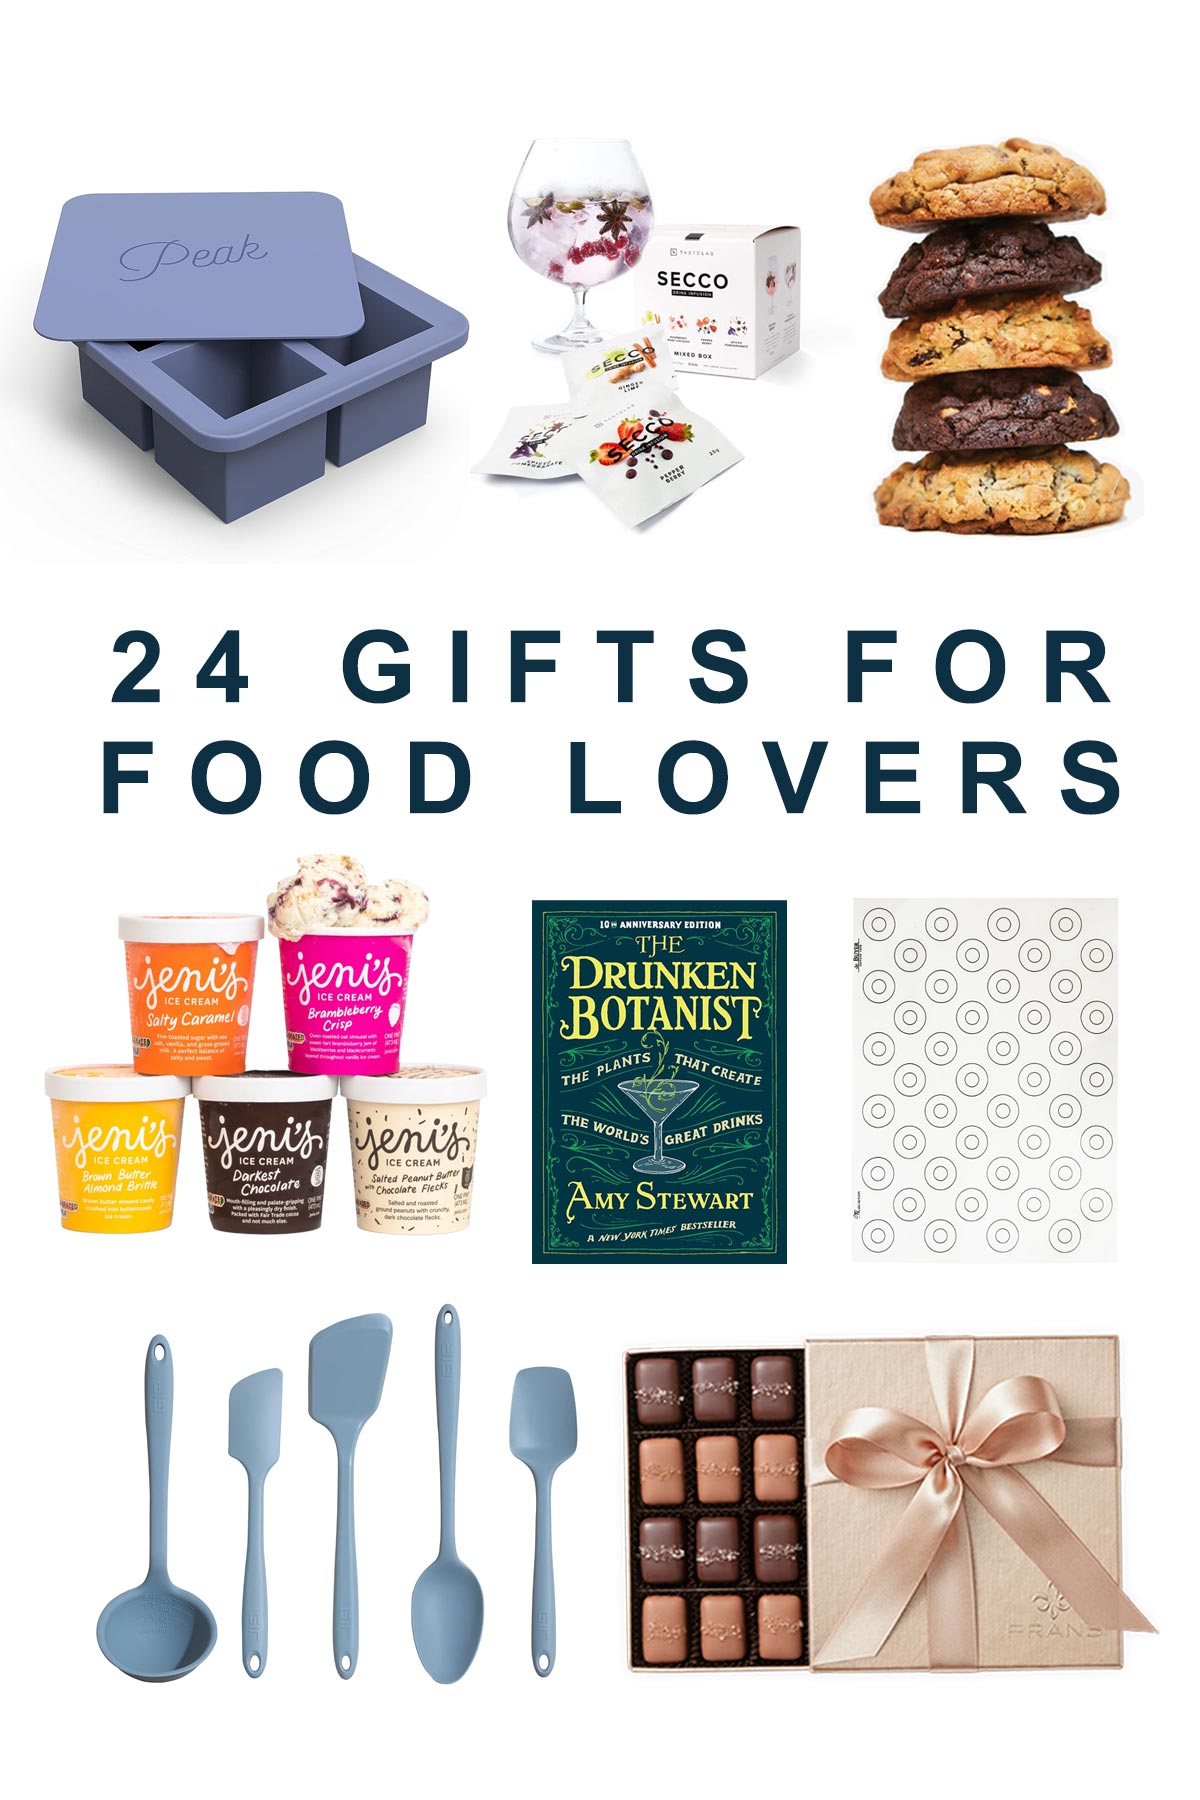 8 Super Thoughtful Gifts for the Gourmet in Your Life